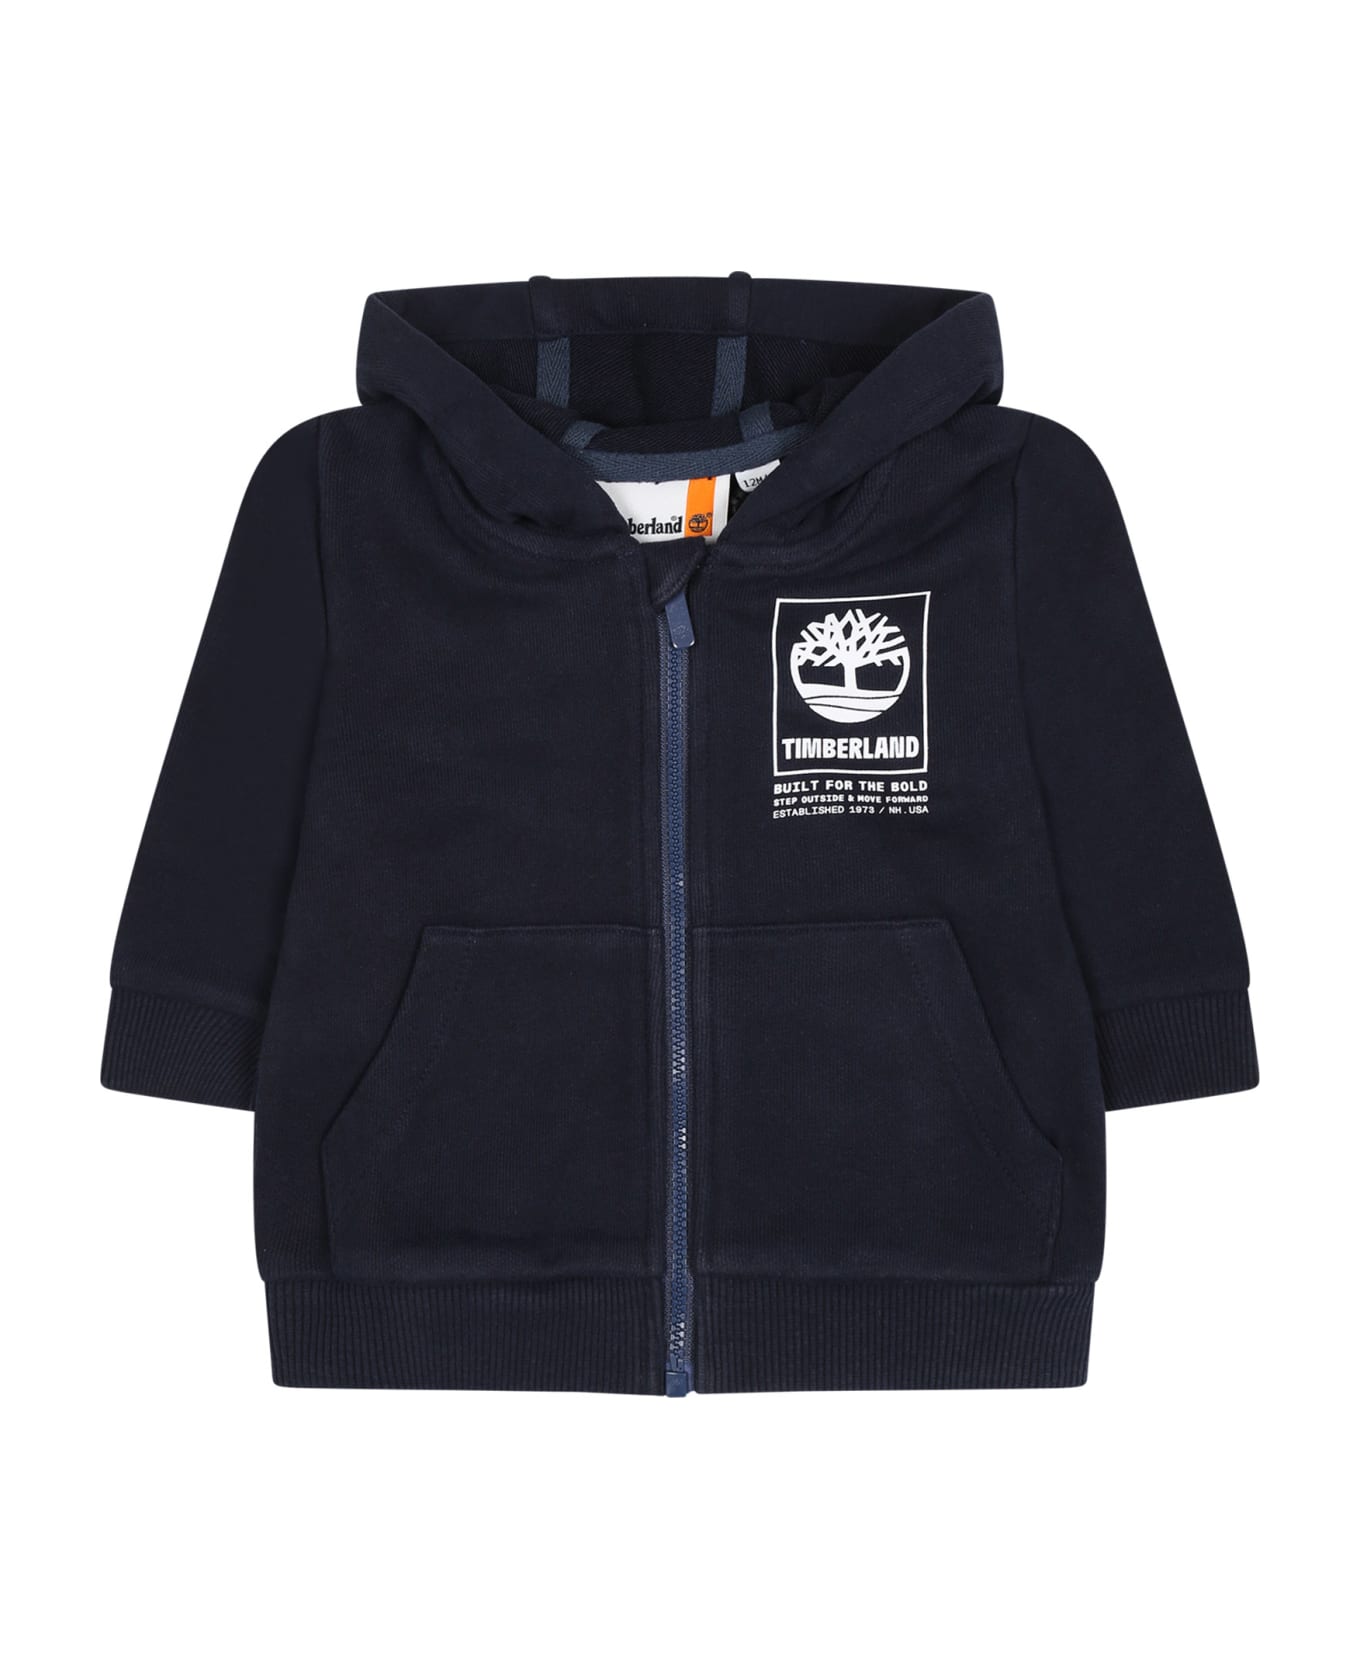 Timberland Blue Hooded Sweatshirt For Baby Boy With Logo - Blue